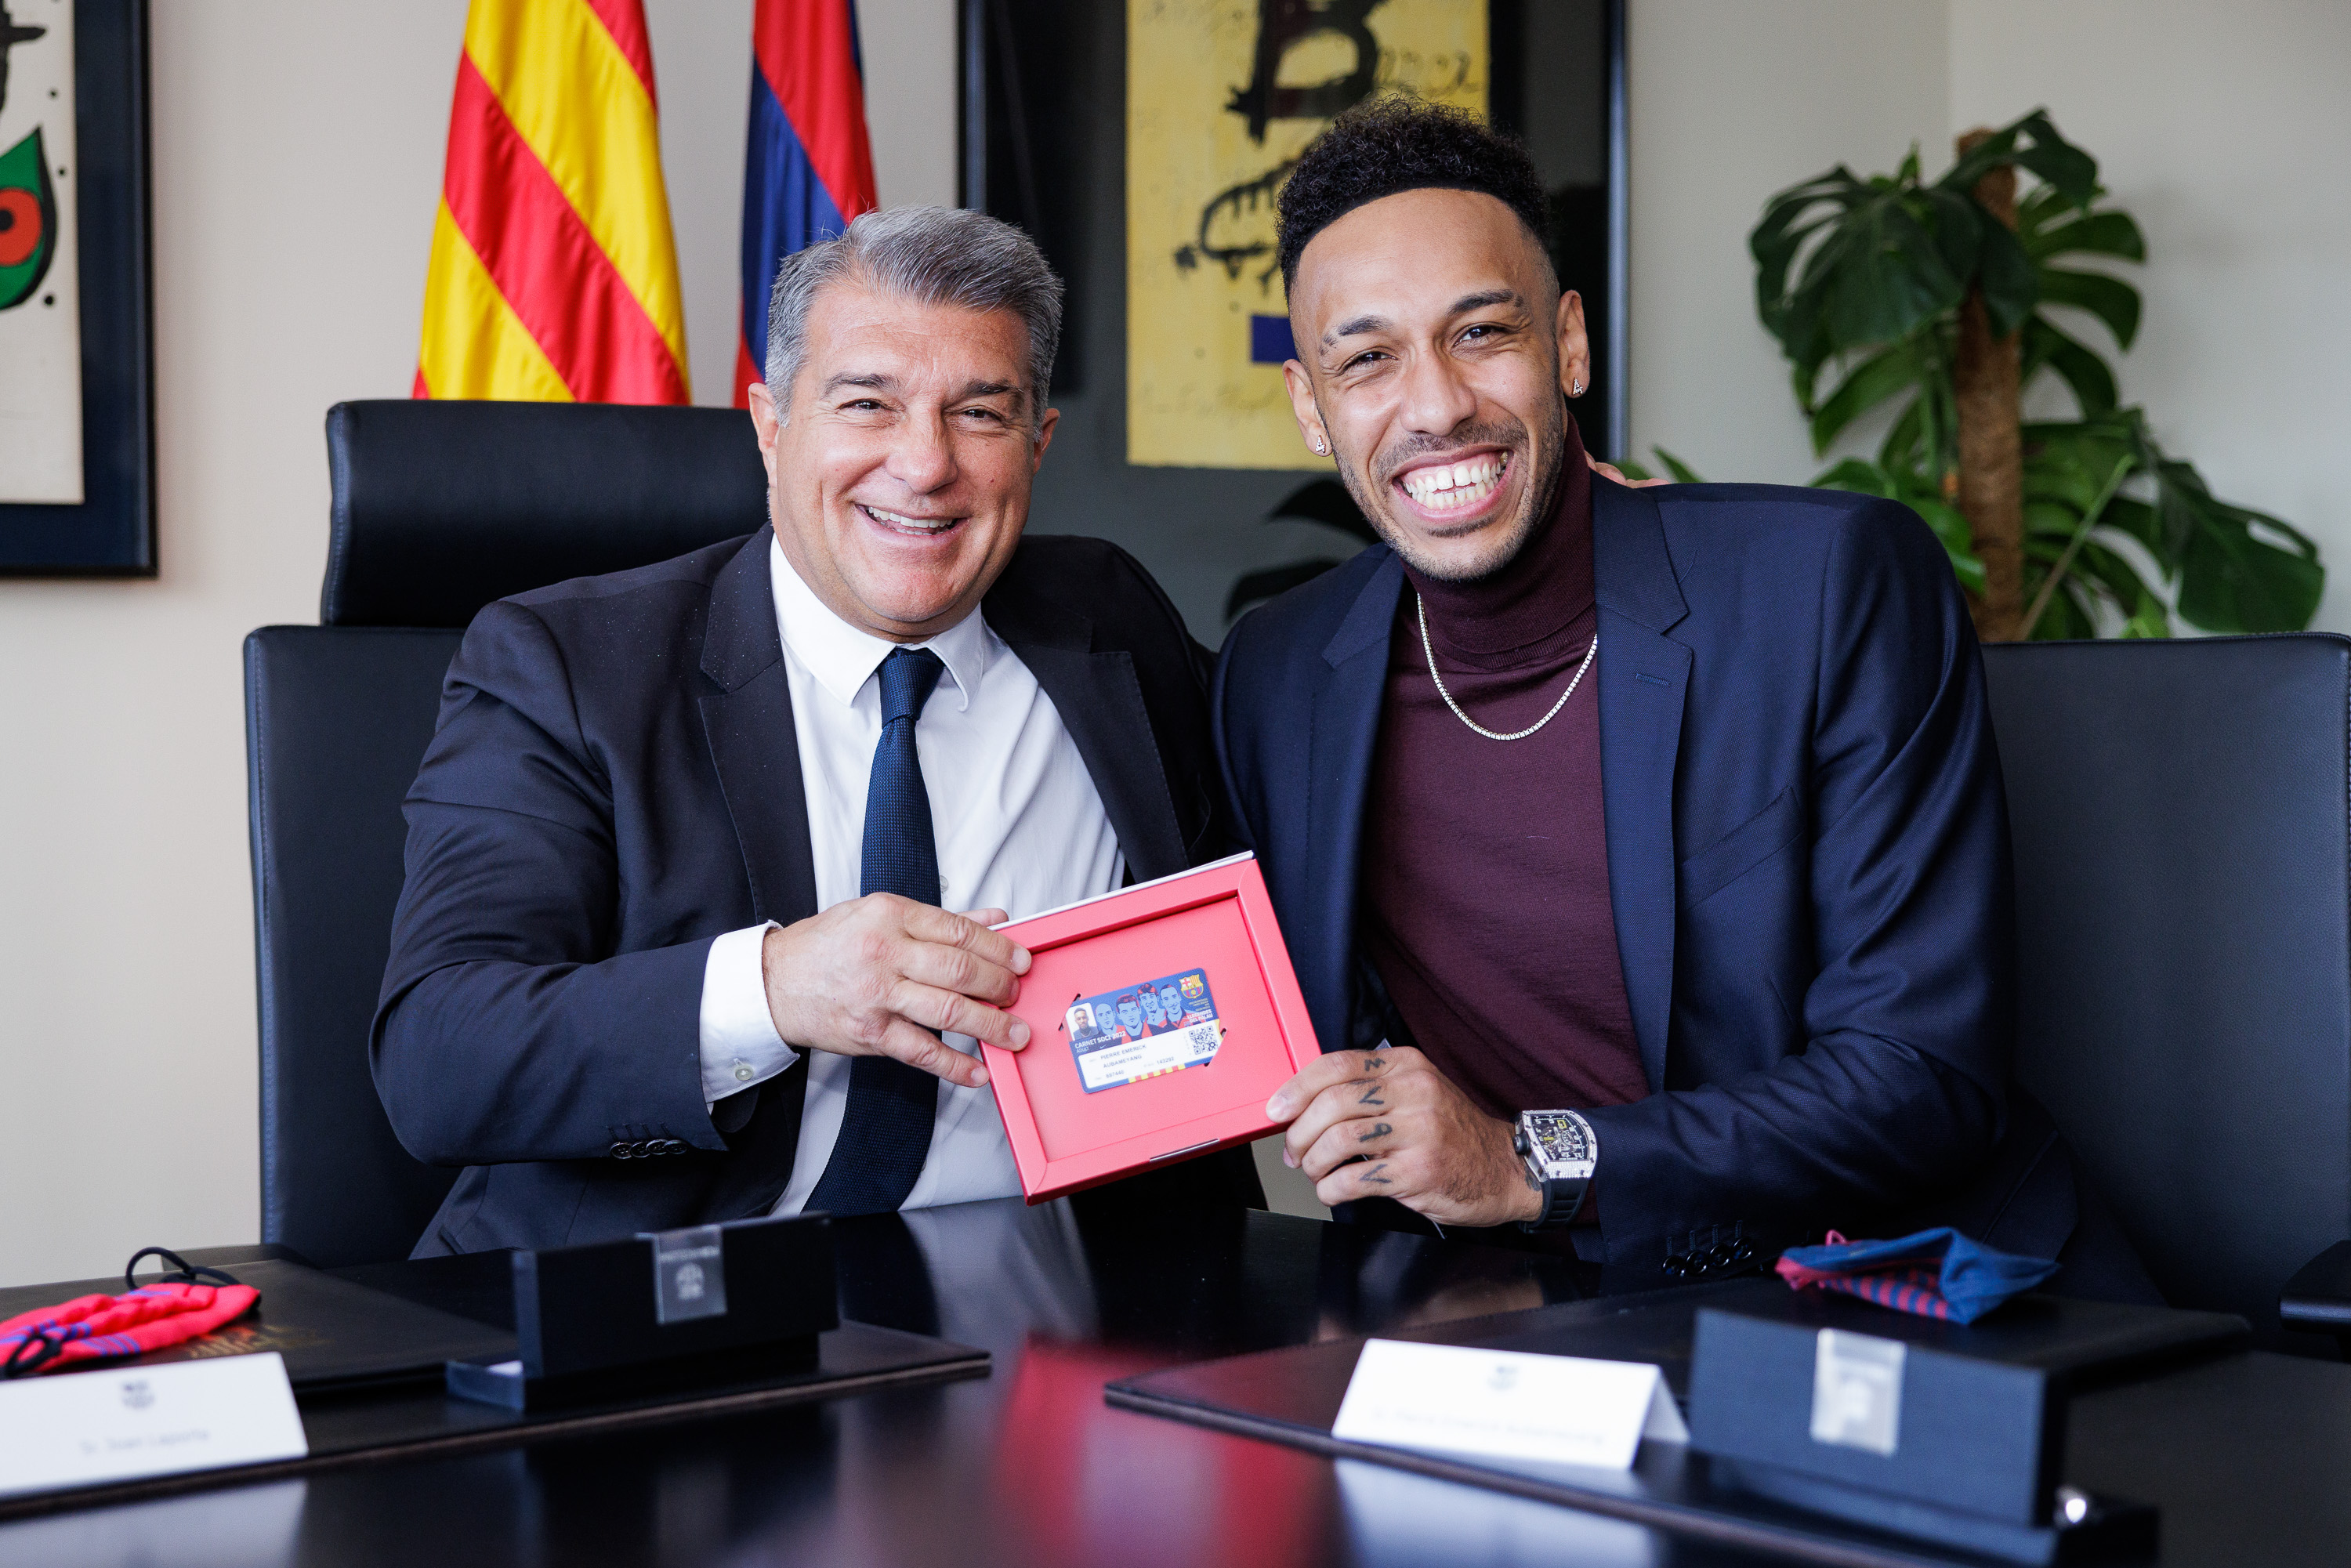 Barca's plan B Aubameyang becomes a must as negotiations continue 